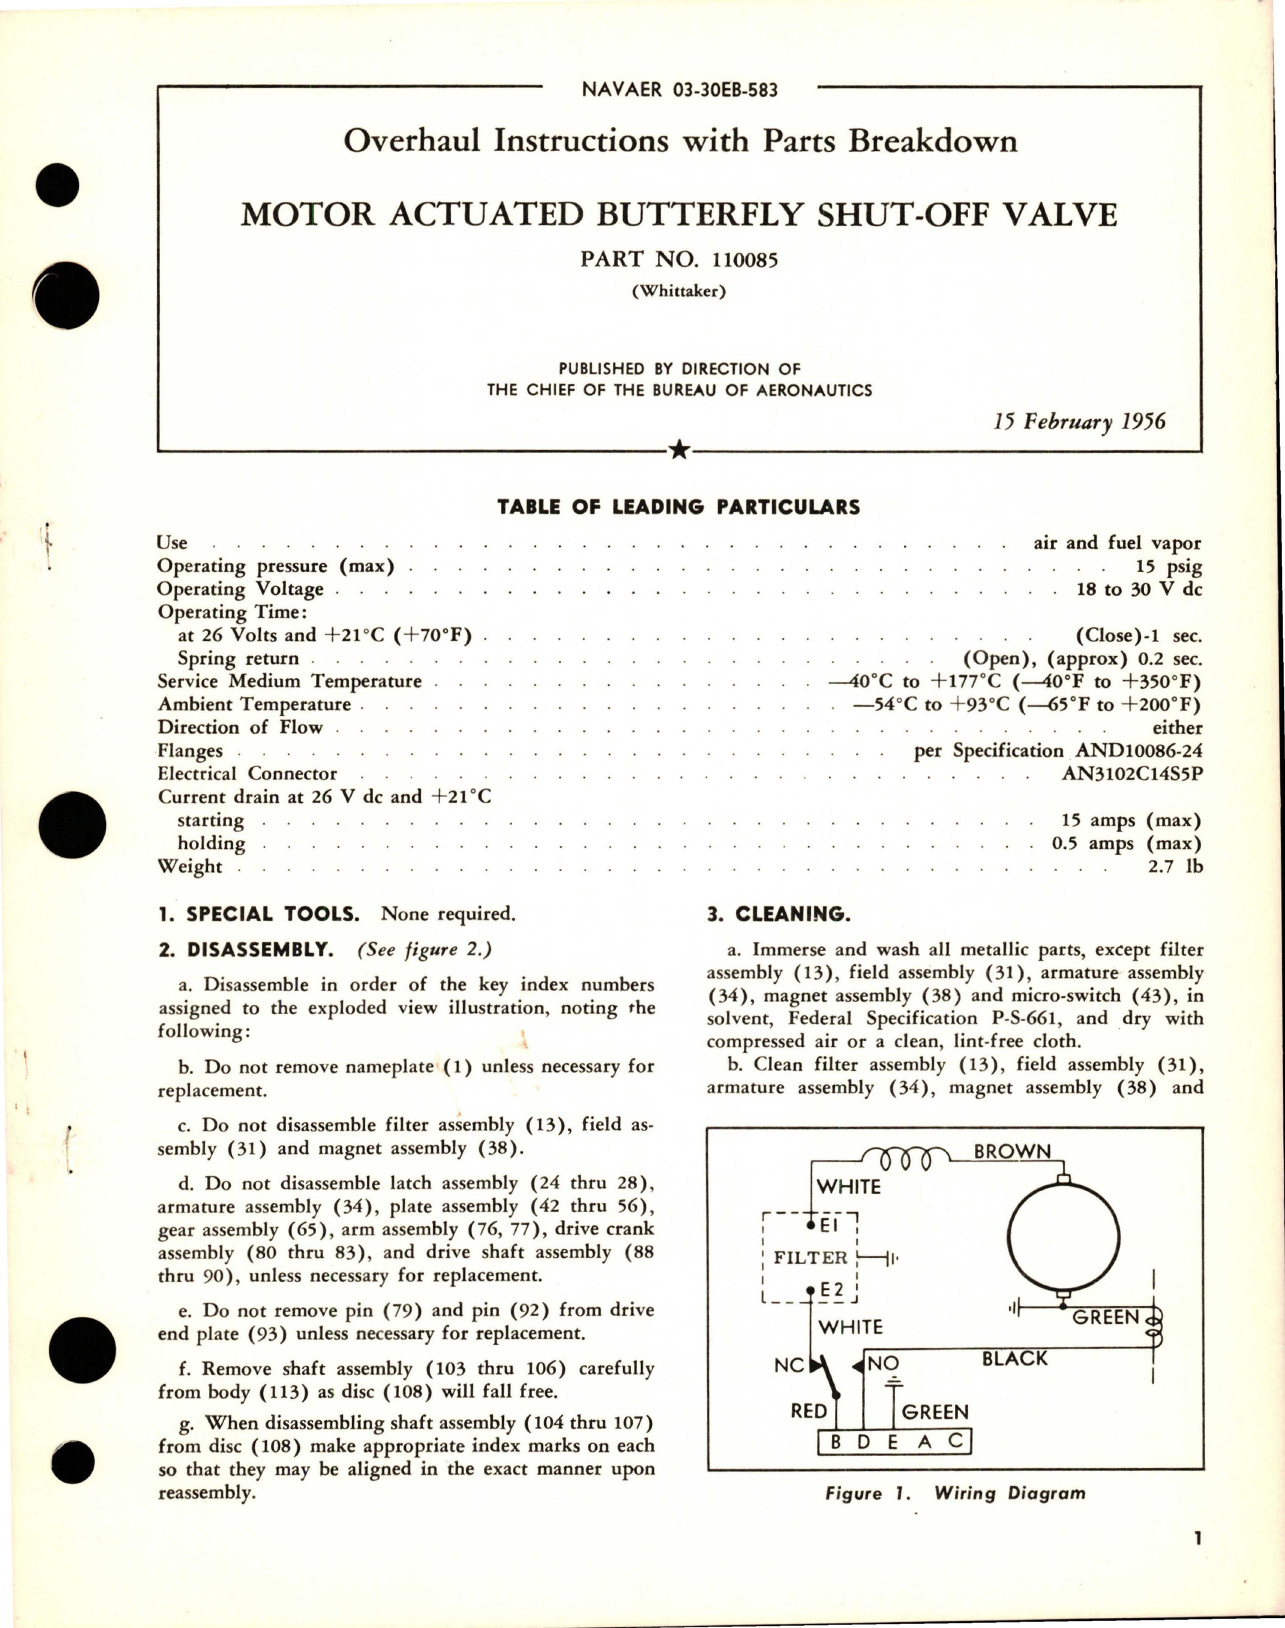 Sample page 1 from AirCorps Library document: Overhaul Instructions with Parts for Motor Actuated Butterfly Shut Off Valve - Part 110085